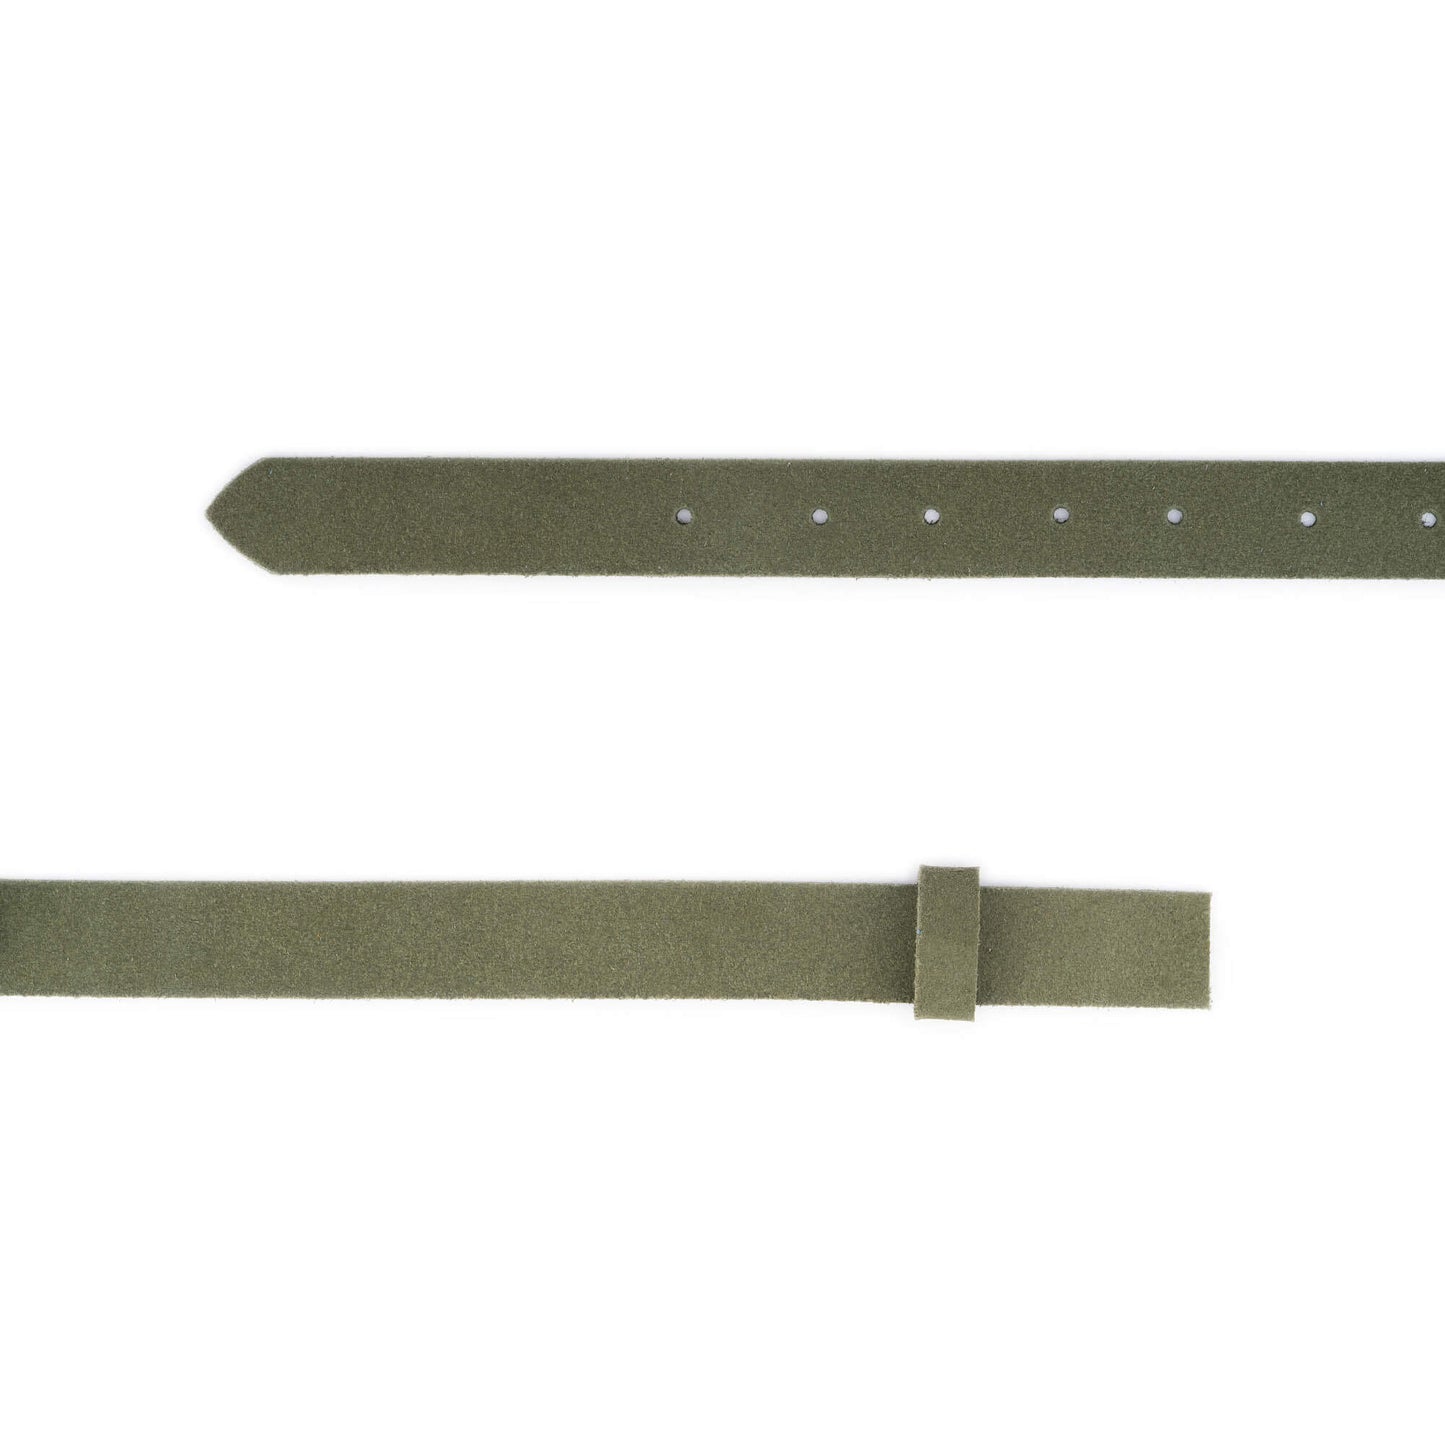 Olive Green Suede Leather Belt Strap For Dunhill Buckles Replacement 2.5 cm